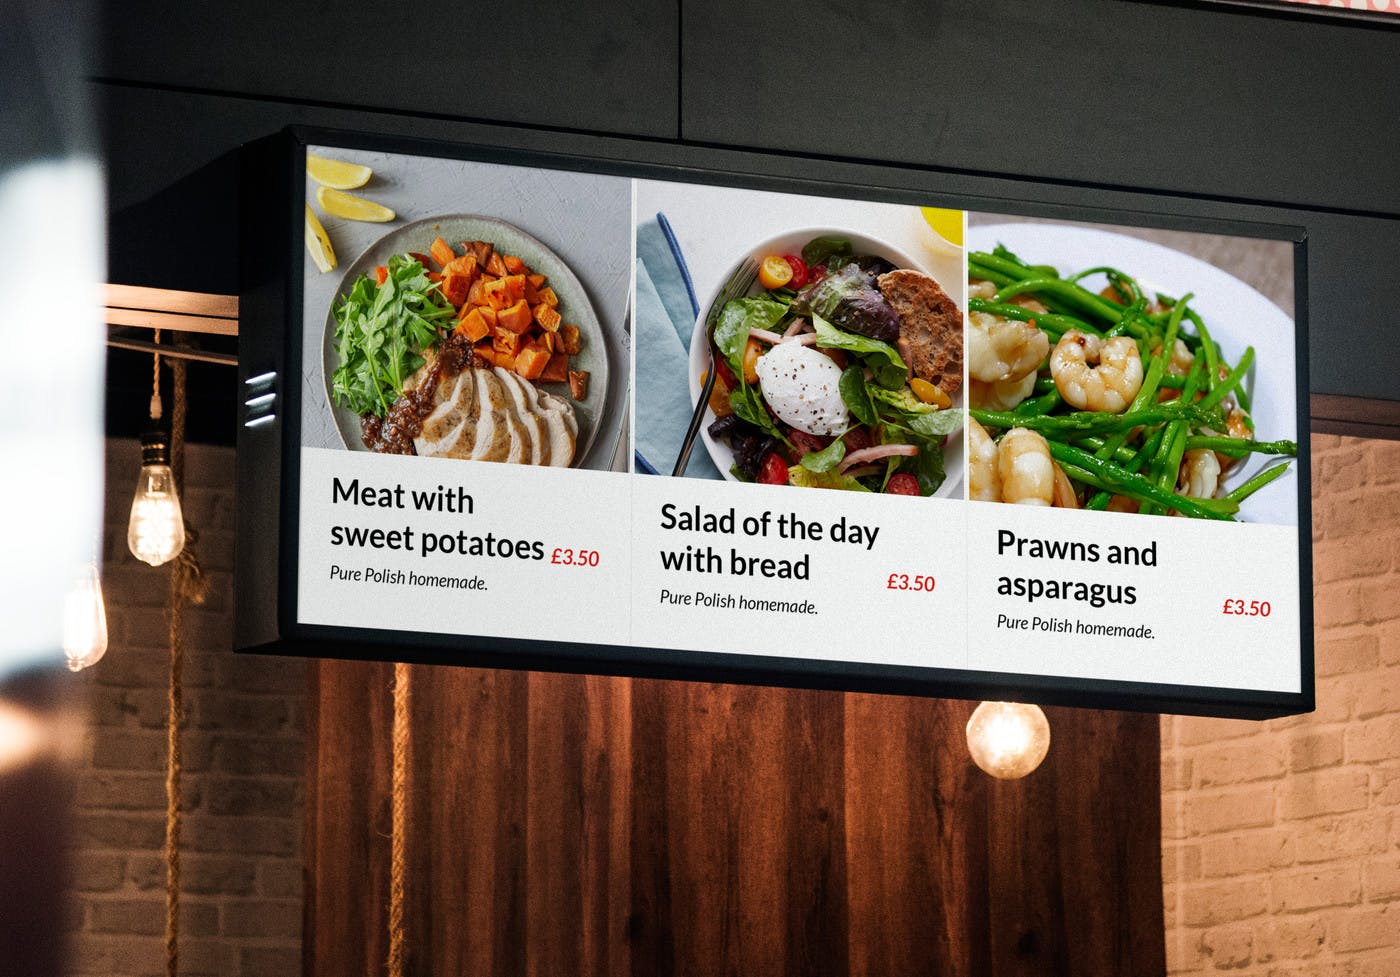 7 Ways Restaurants Can Use Digital Signage To Be More Awesome - ScreenCloud